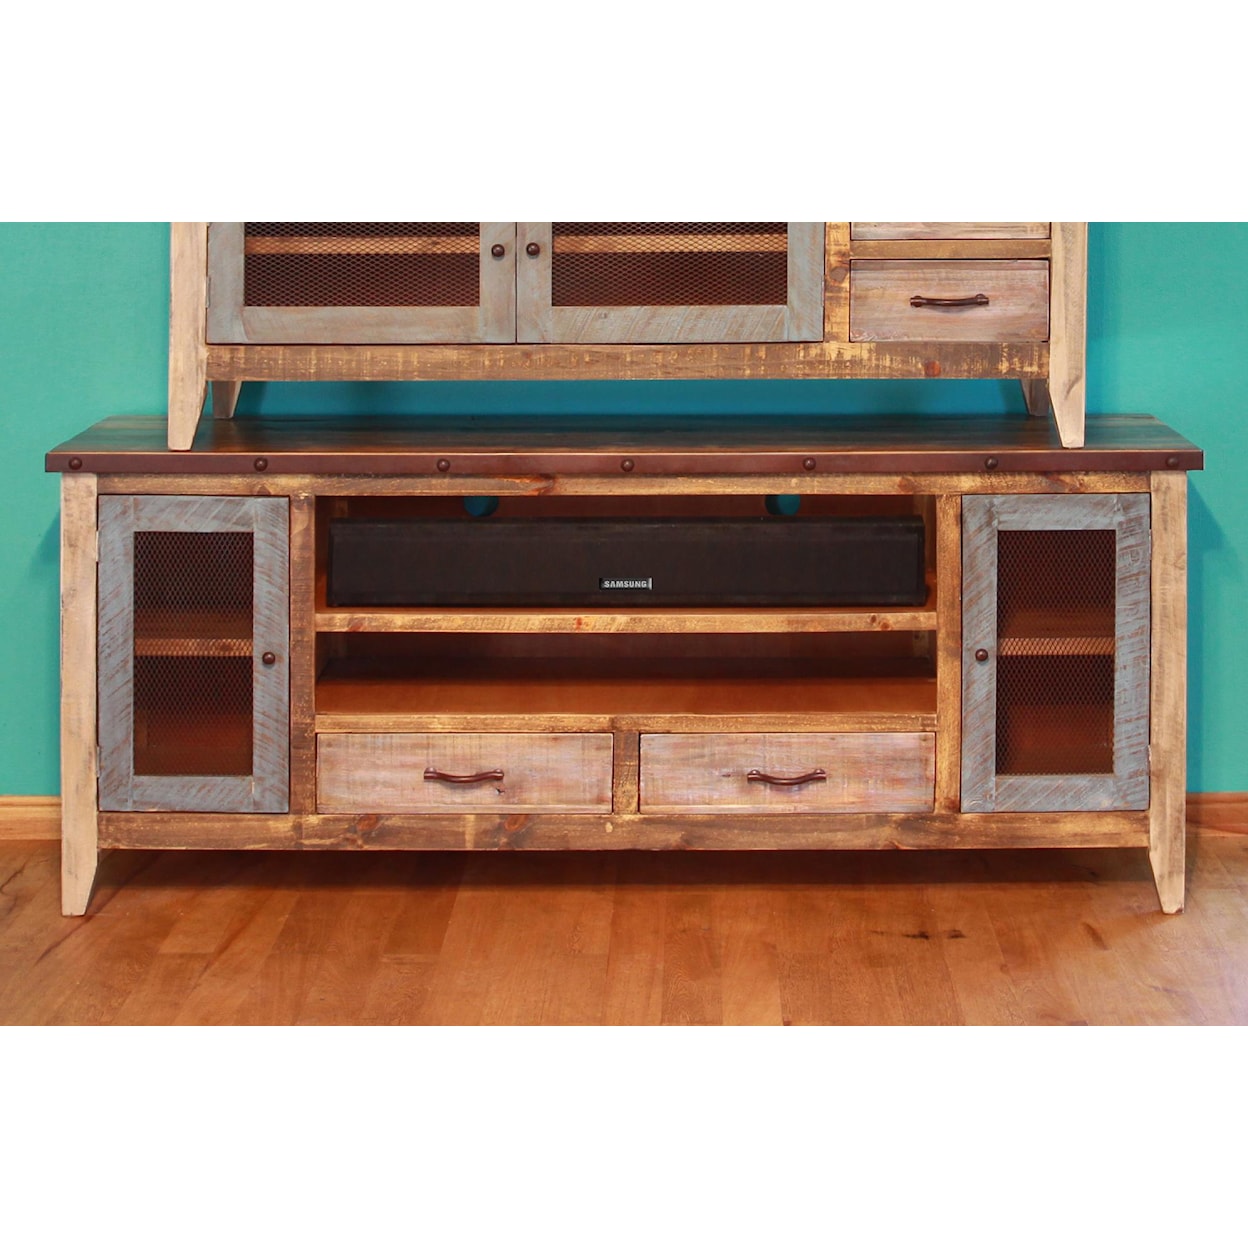 IFD International Furniture Direct 900 Antique Solid Pine 76" TV Stand